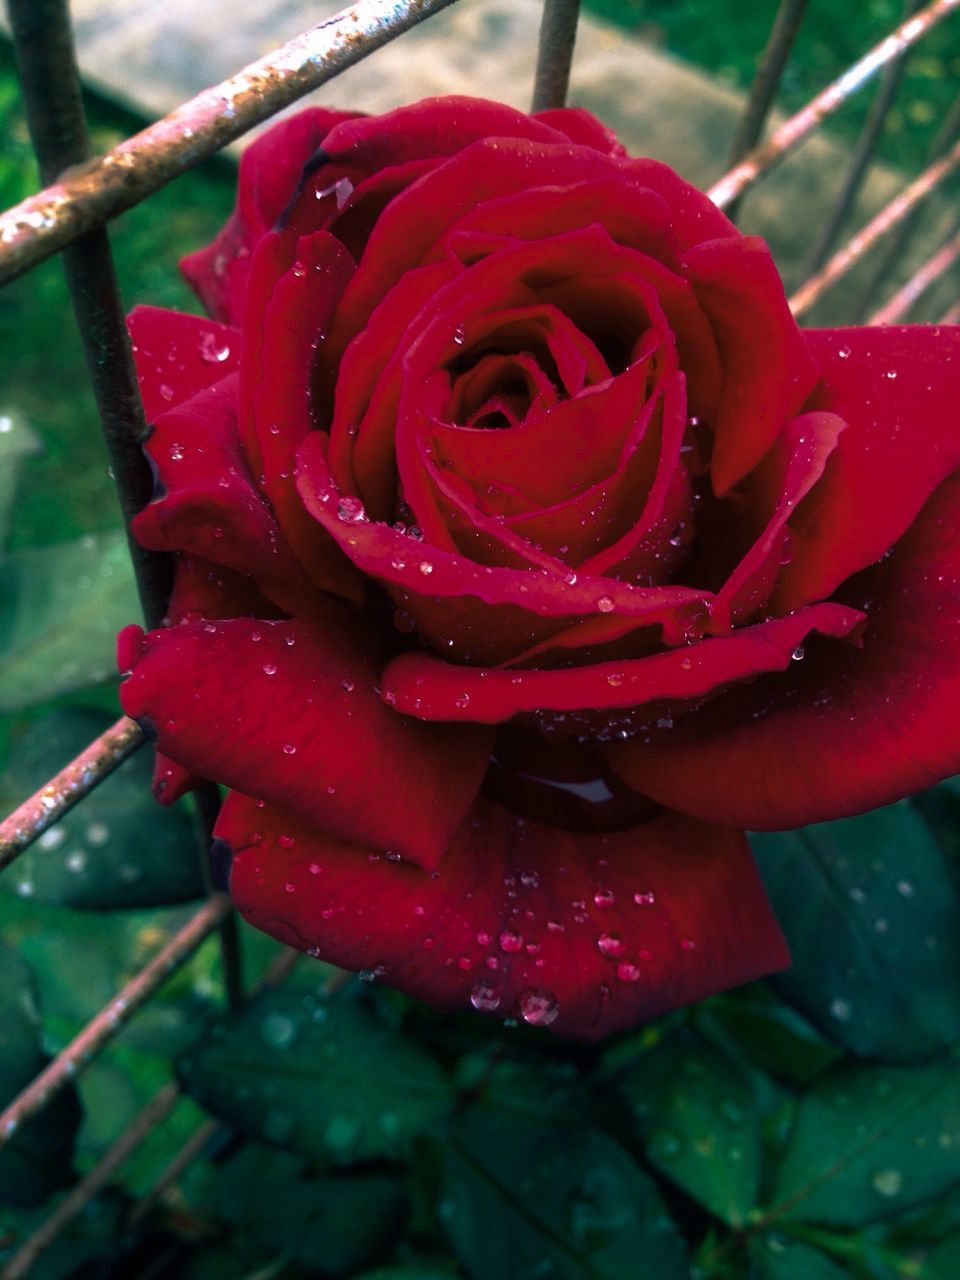 flower, freshness, drop, petal, fragility, water, close-up, flower head, wet, growth, red, focus on foreground, beauty in nature, plant, blooming, dew, nature, single flower, rose - flower, in bloom